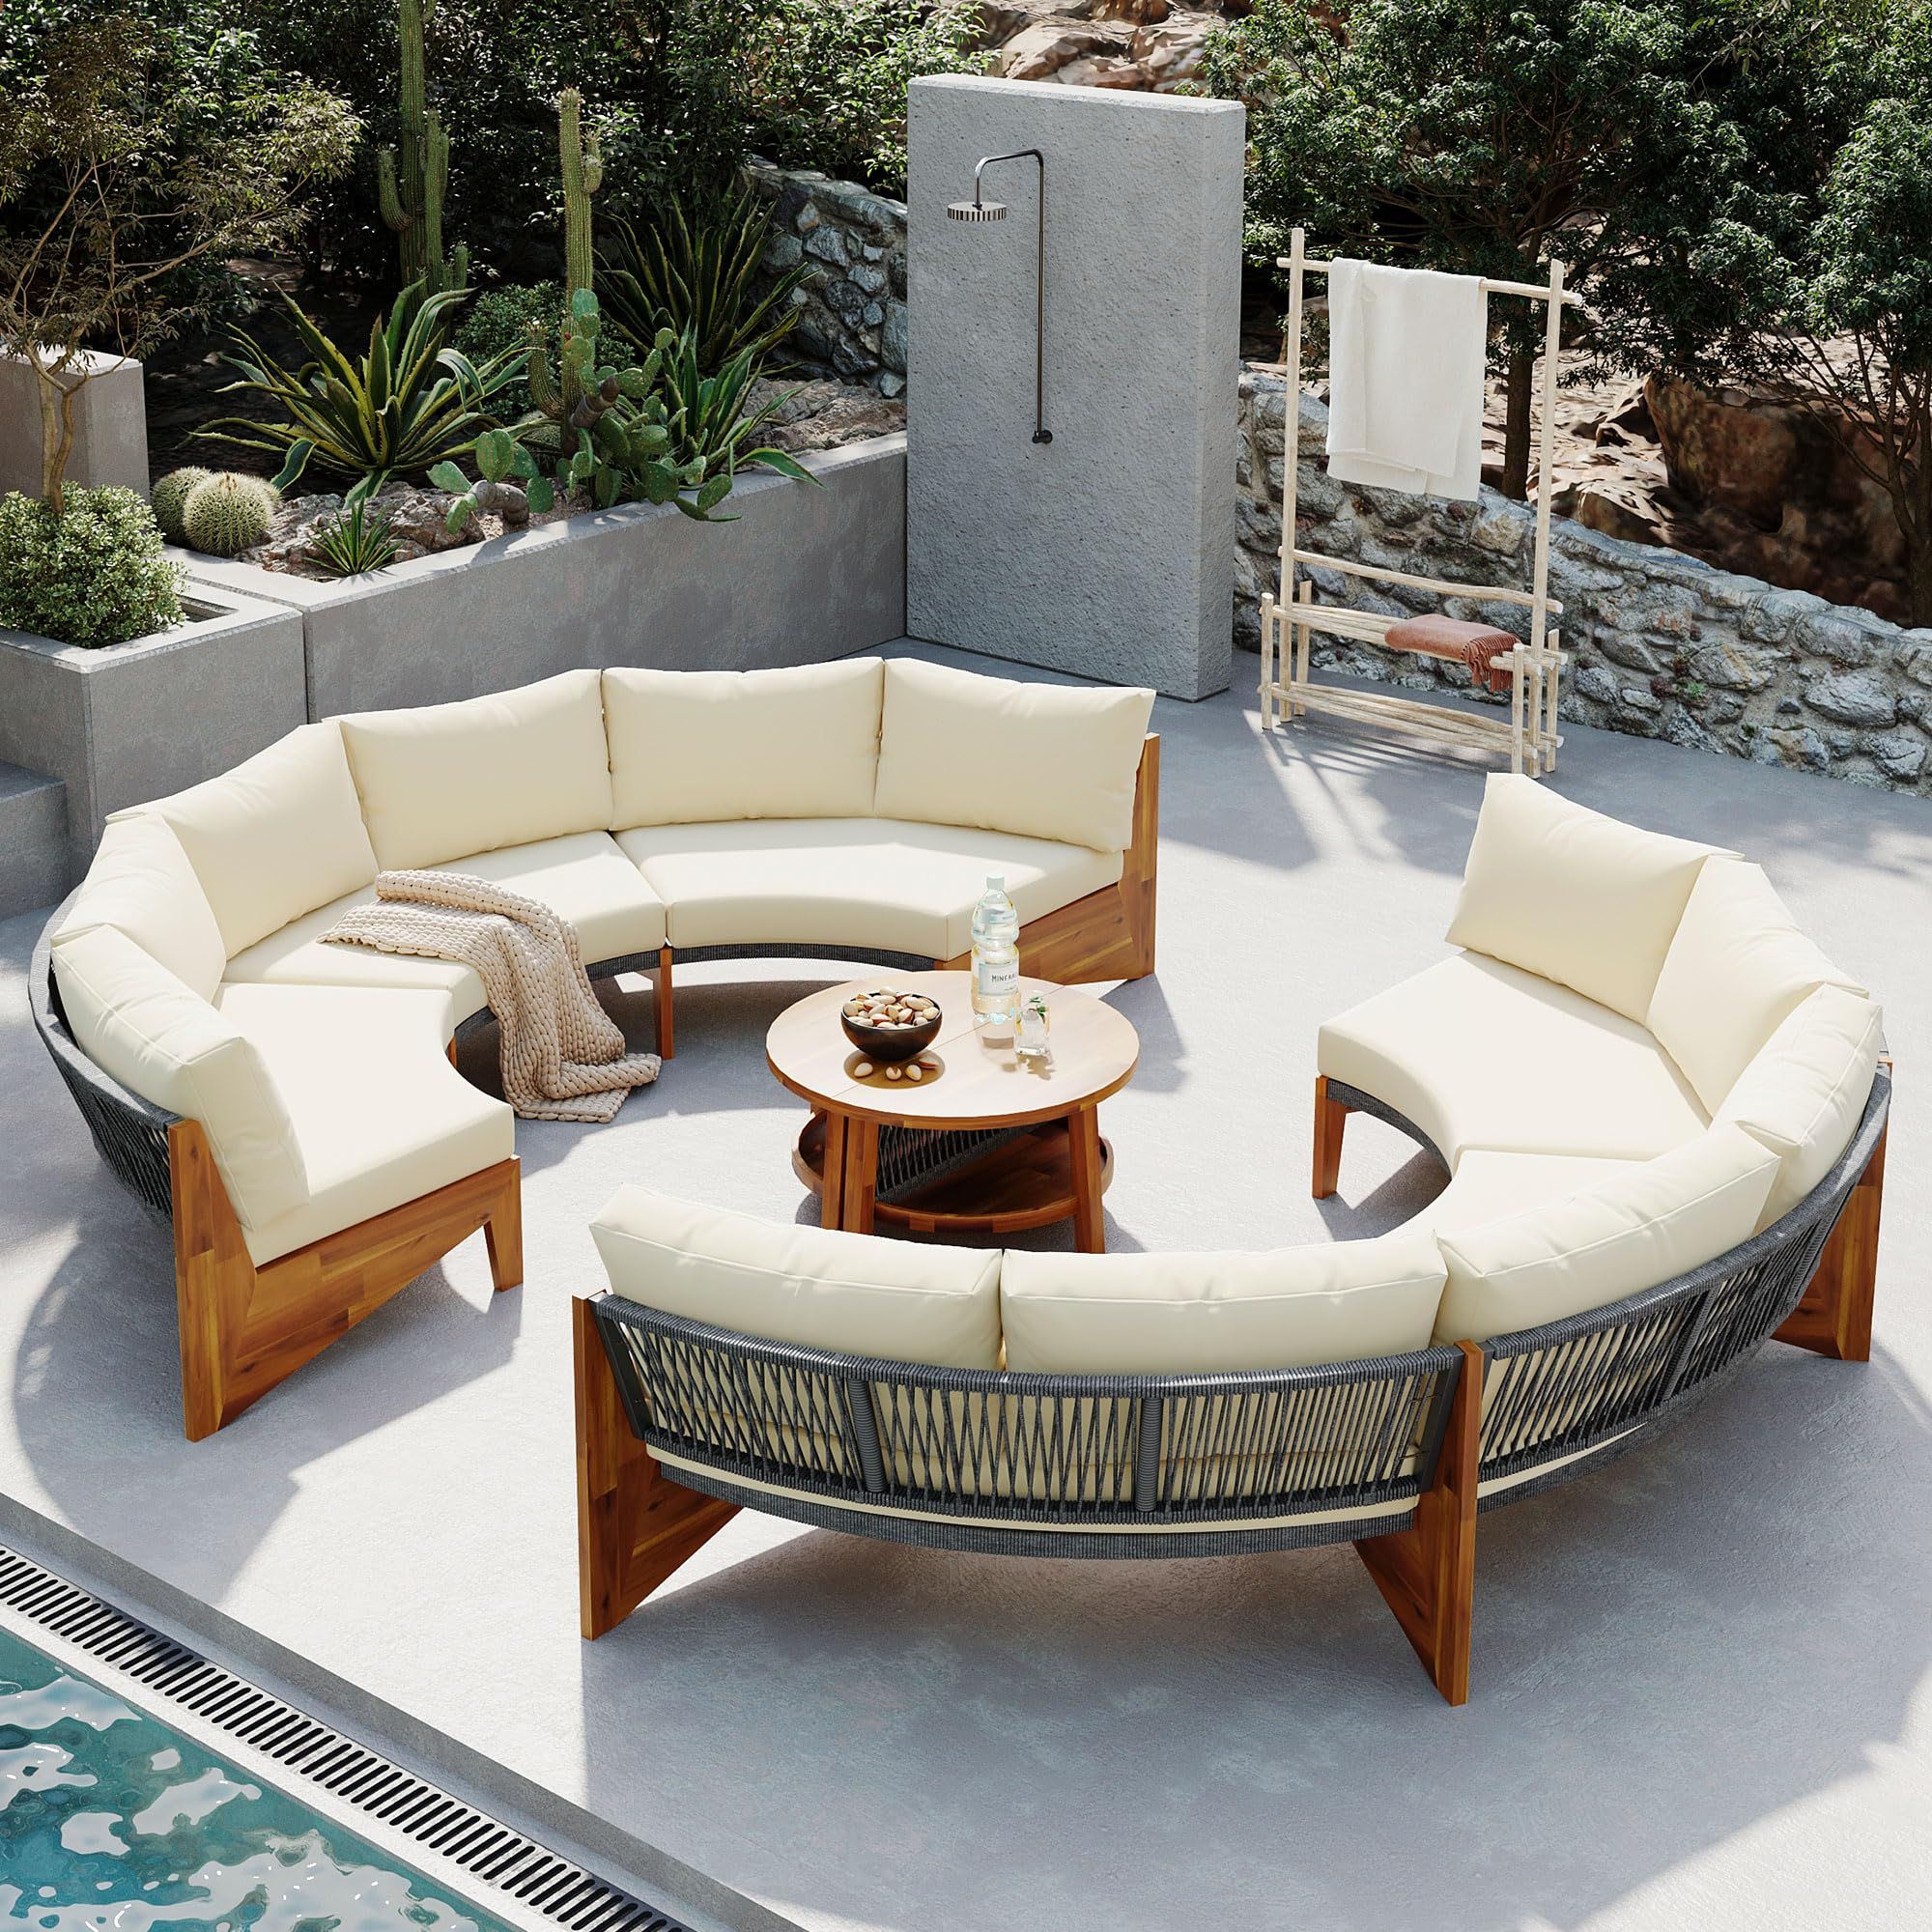 Transform Your Outdoor Space with a Stylish Sectional Sofa Set